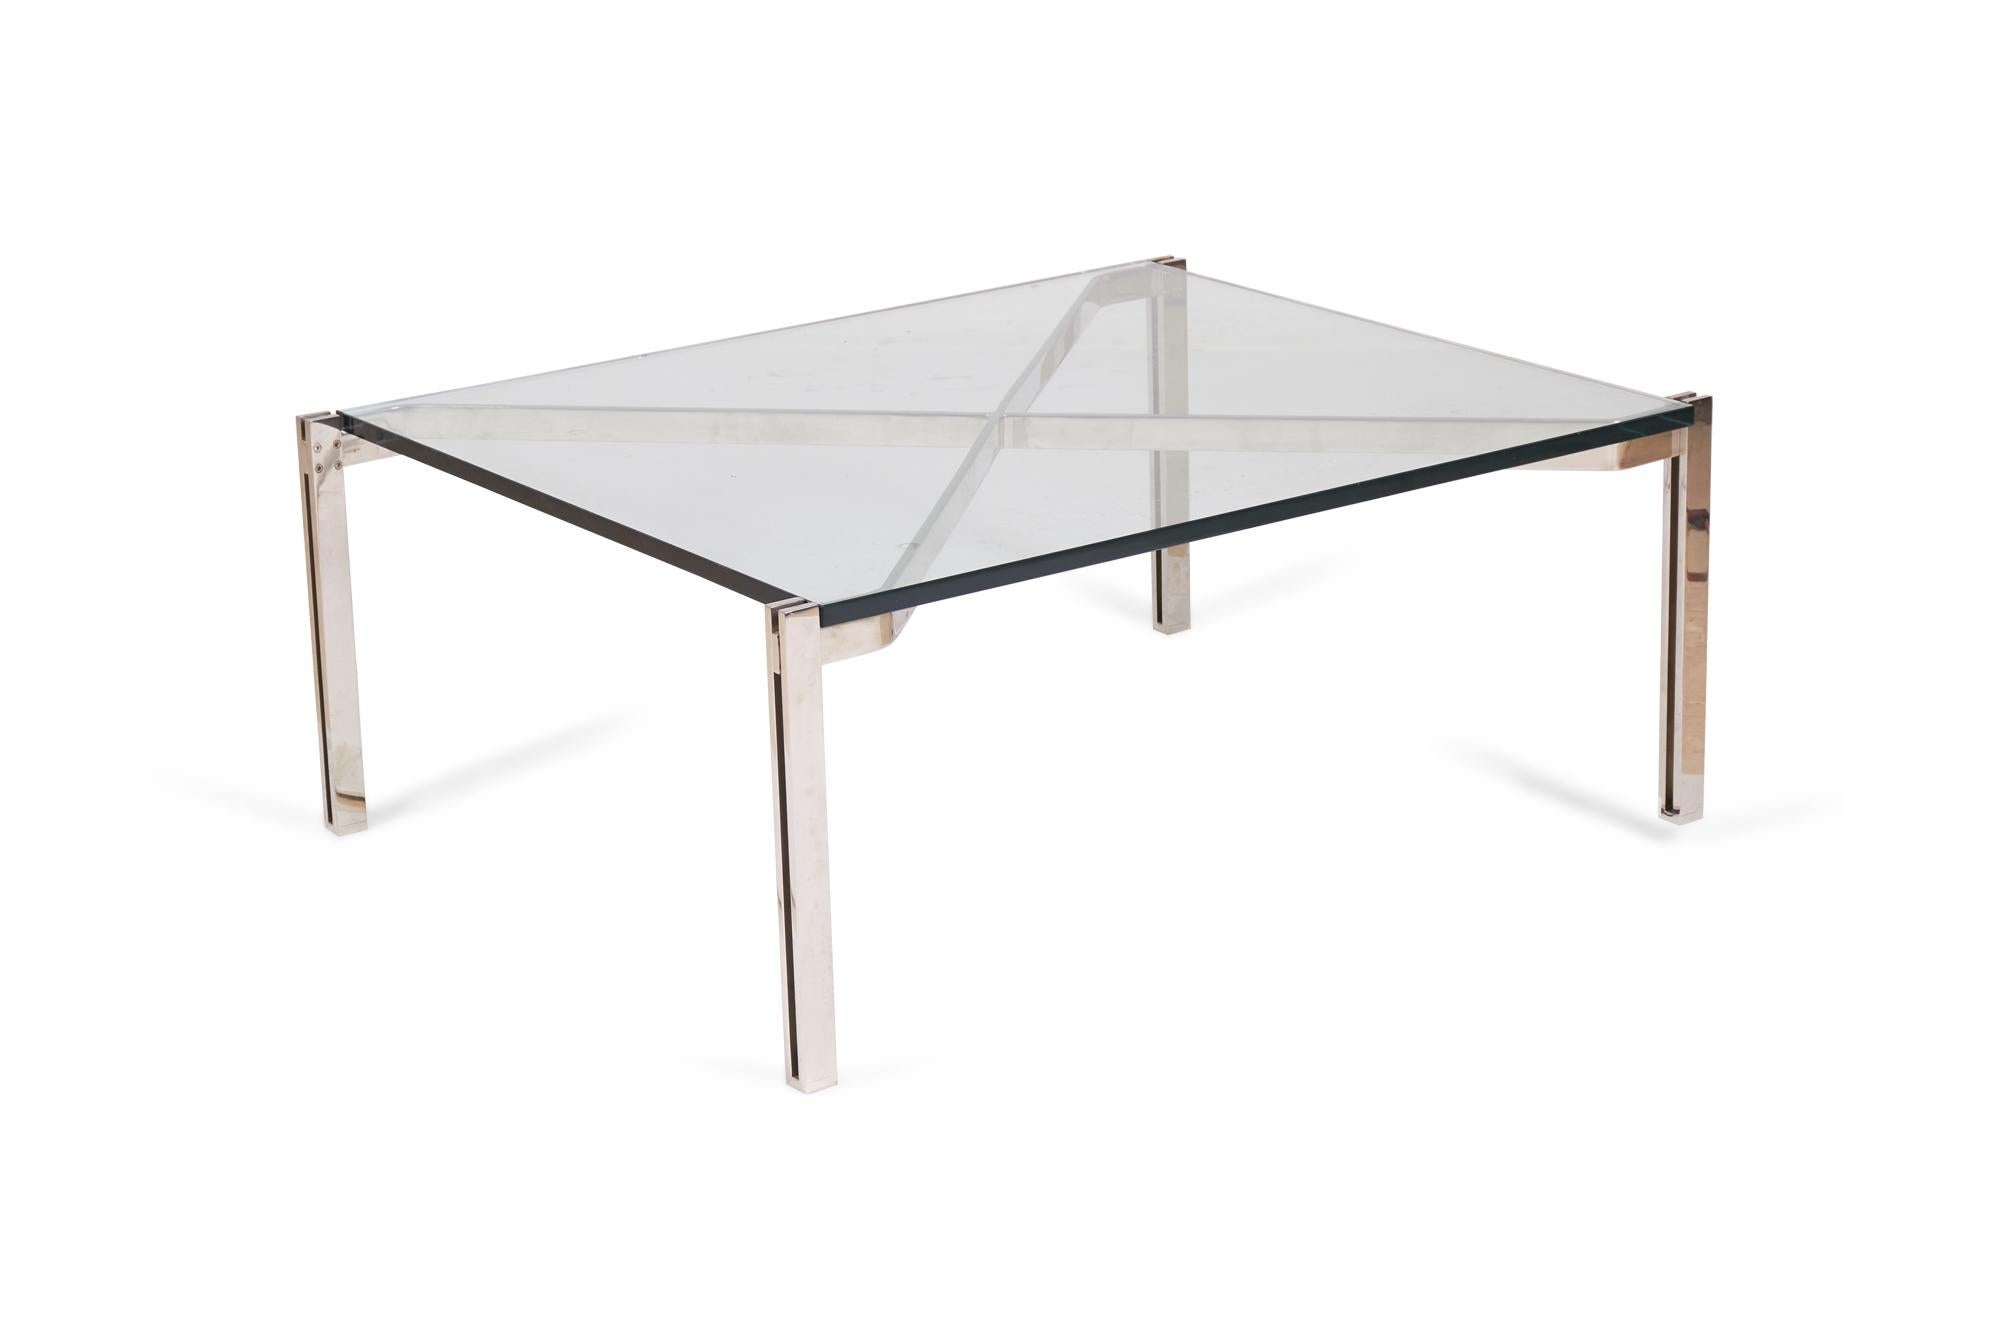 Italian Modernist 'X' Frame Steel and Glass Coffee Table 'Manner of B&B Italia' In Good Condition For Sale In New York, NY